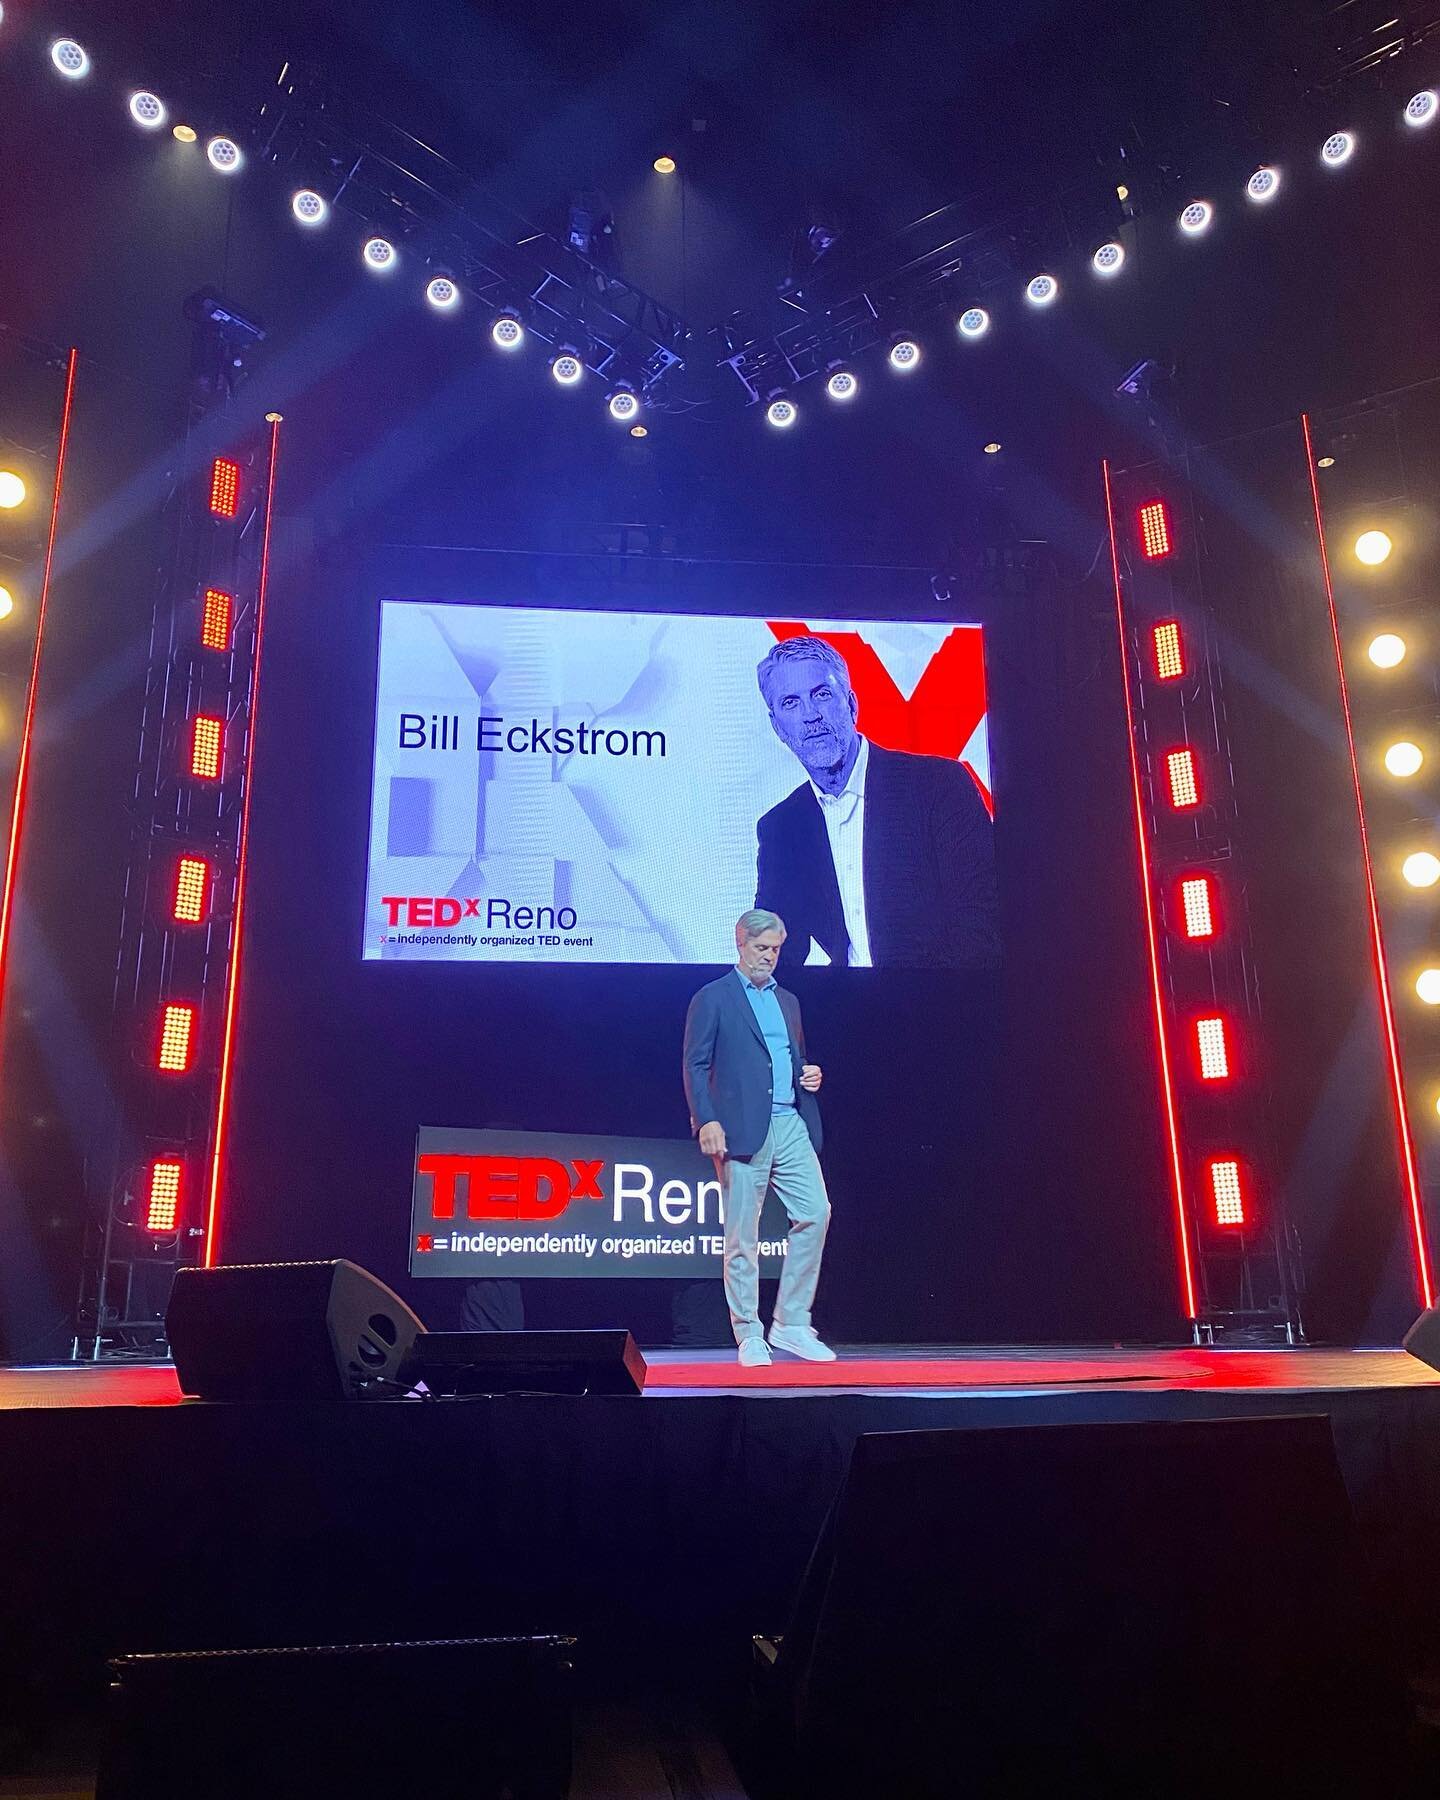 Our CEO, @eckstromwl, gave his second TEDx Talk at @tedxreno this weekend! Stay tuned for the official video! #tedx #tedtalks